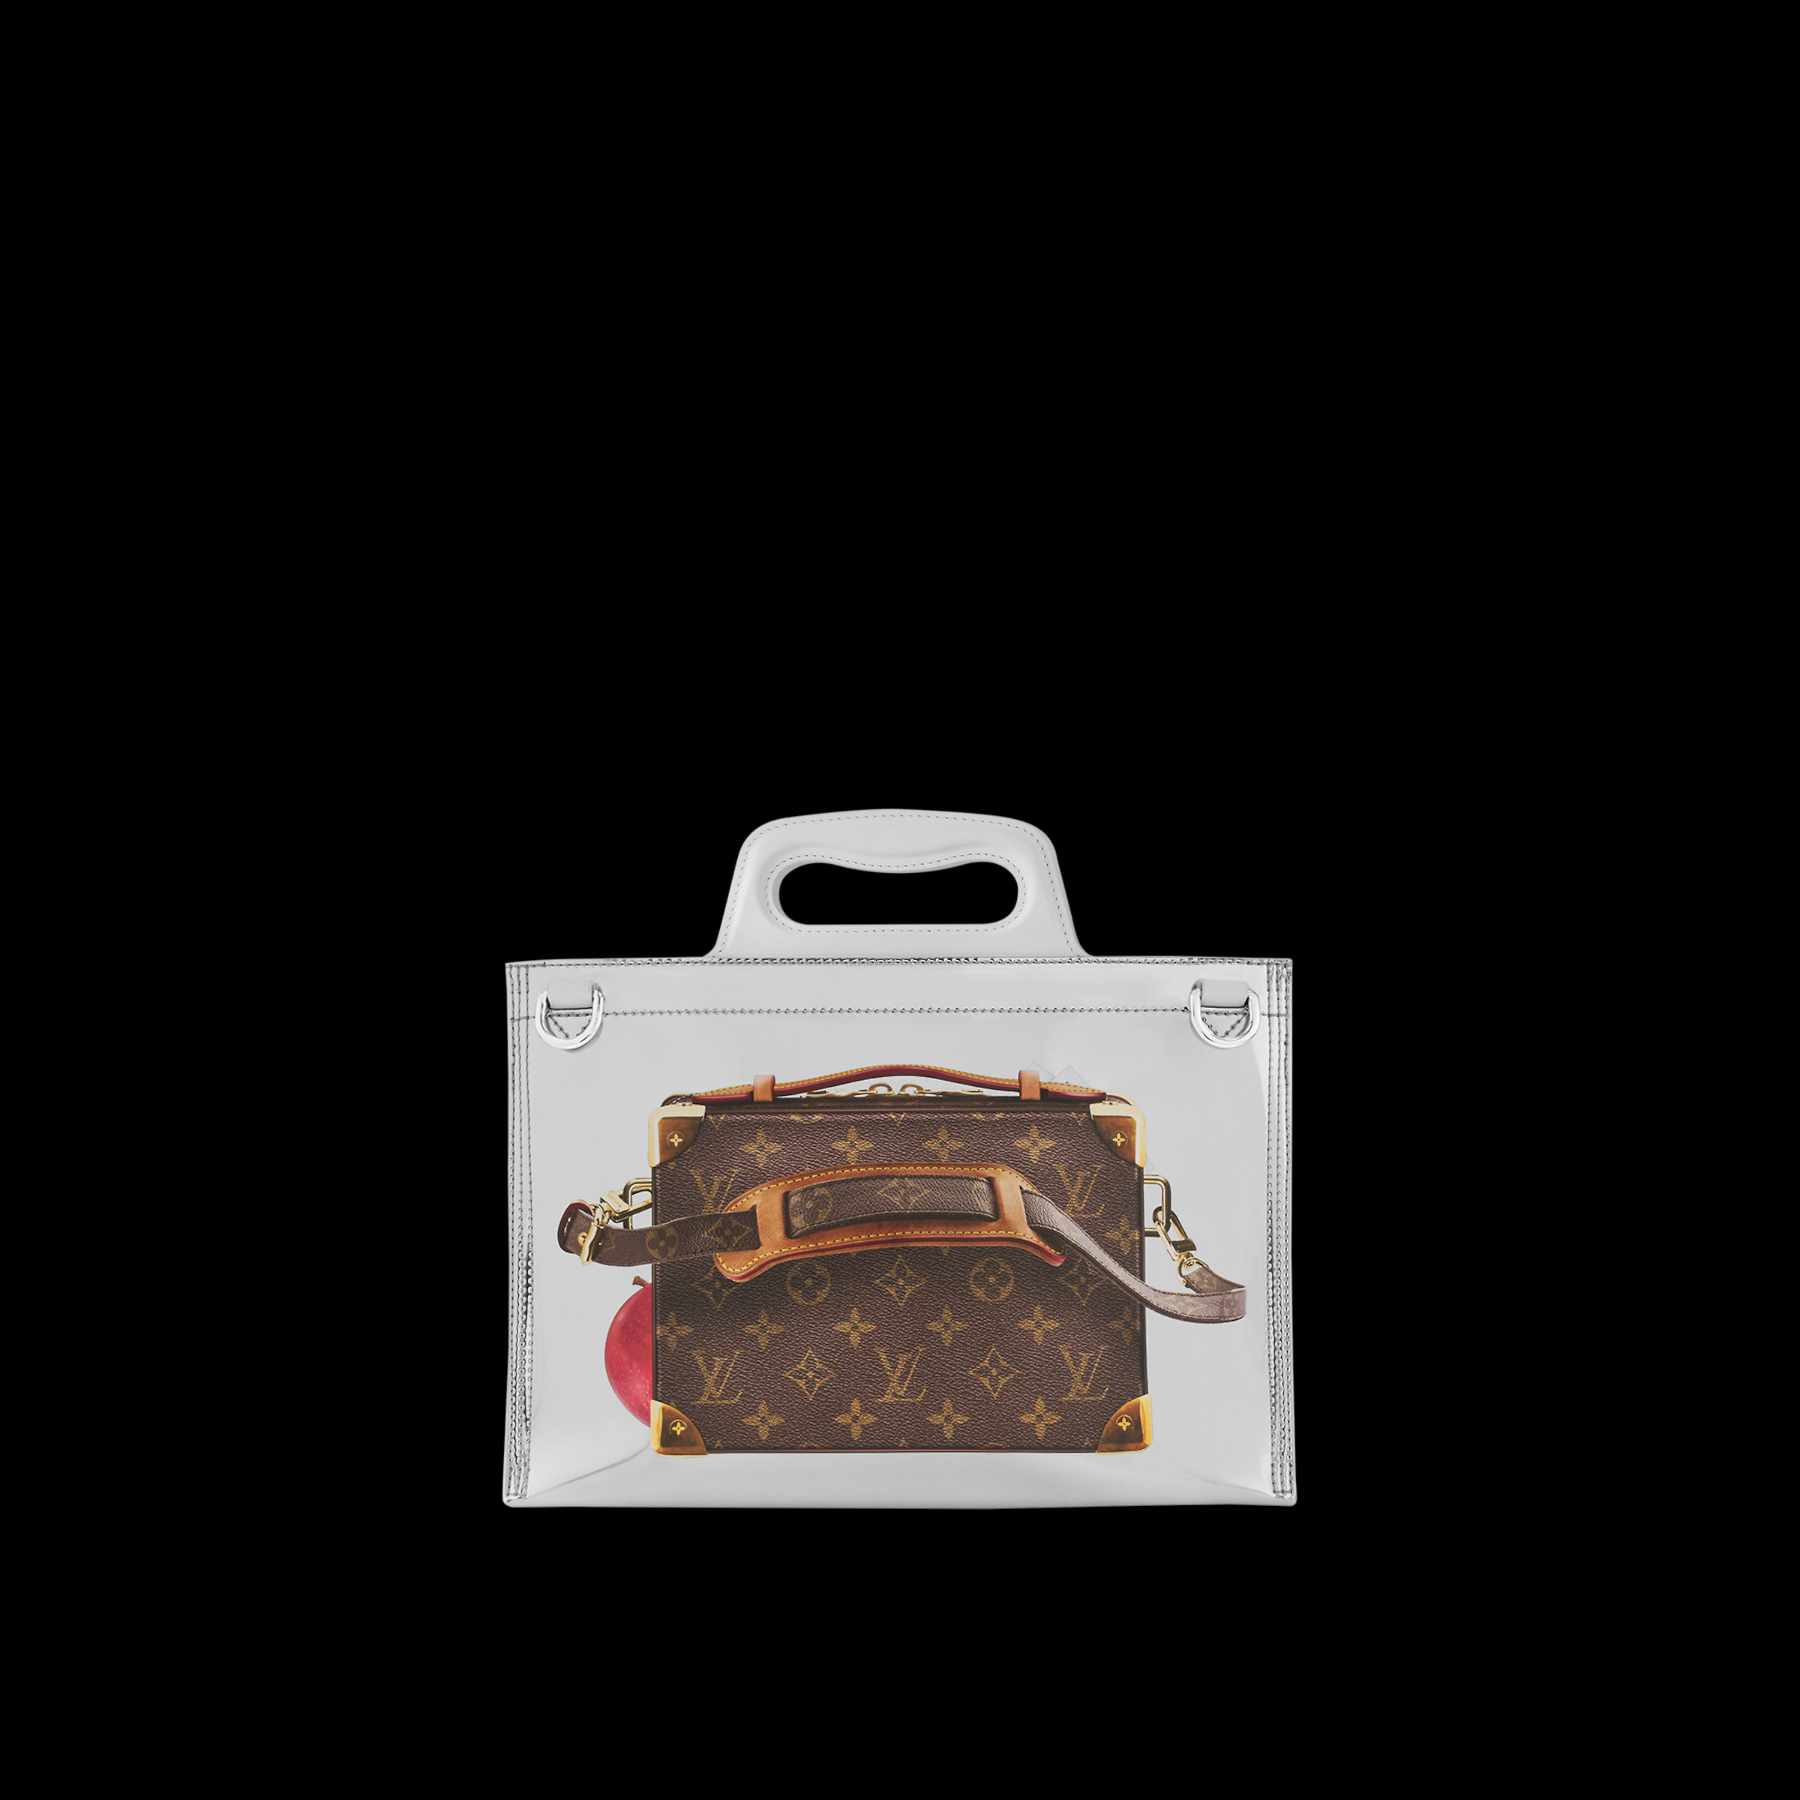 The Top Choice for 'Trunks & Bags' Shoe Tobago Leather Tote Bag Louis  Vuitton